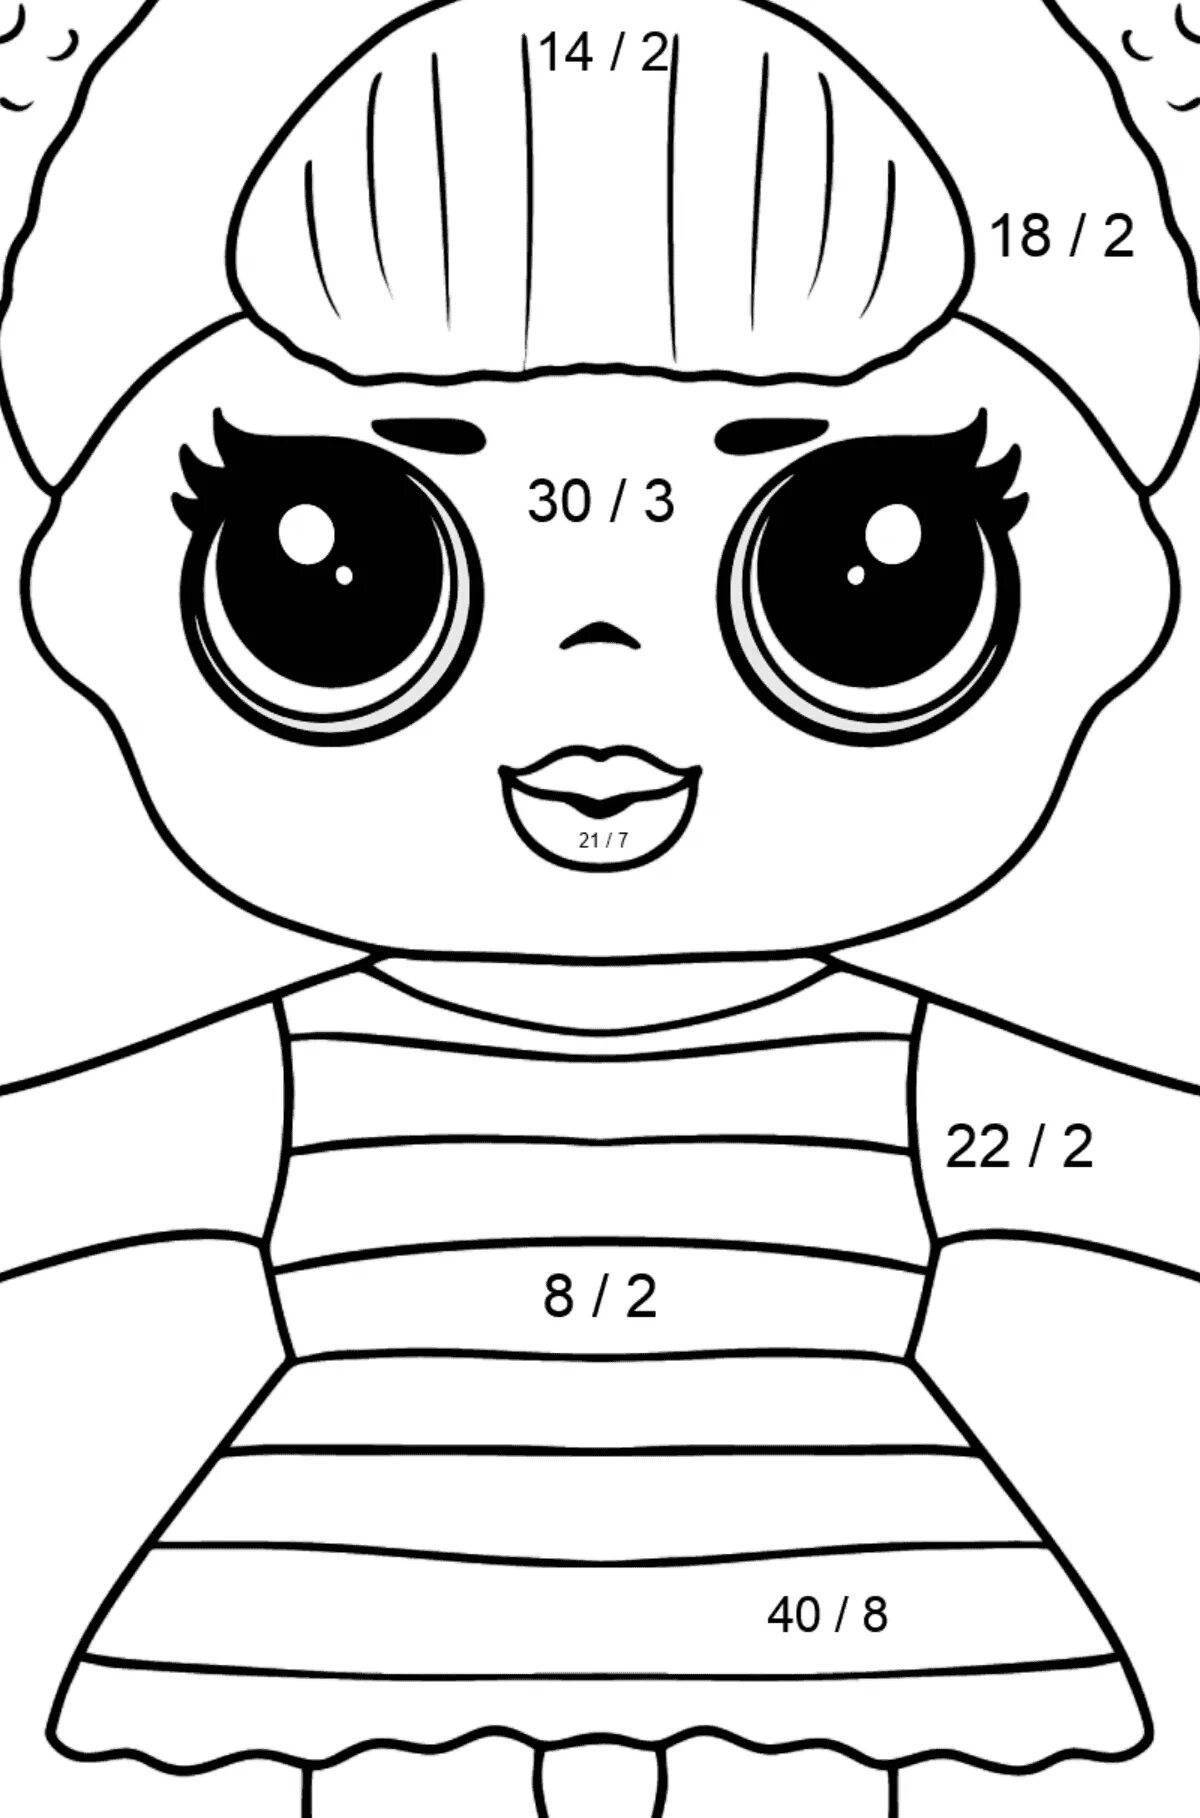 Exciting bee lol coloring page